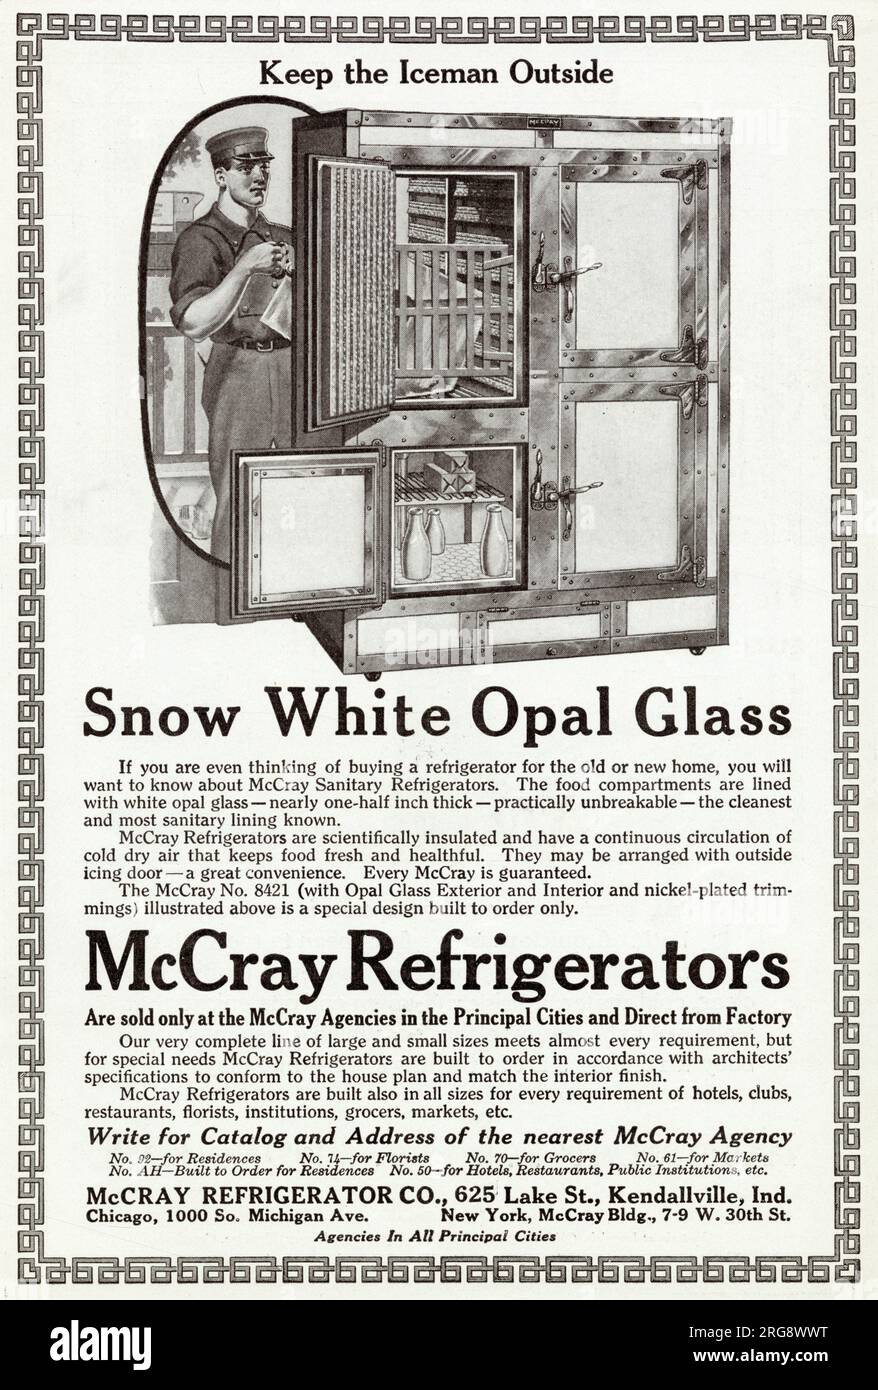 American advert for McCray Refrigerators - Snow White Opal Glass. Food compartments with run an electric motor with nickel-plated trimmings lined with white opal glass and a continuous circulation of cold dry air. Stock Photo